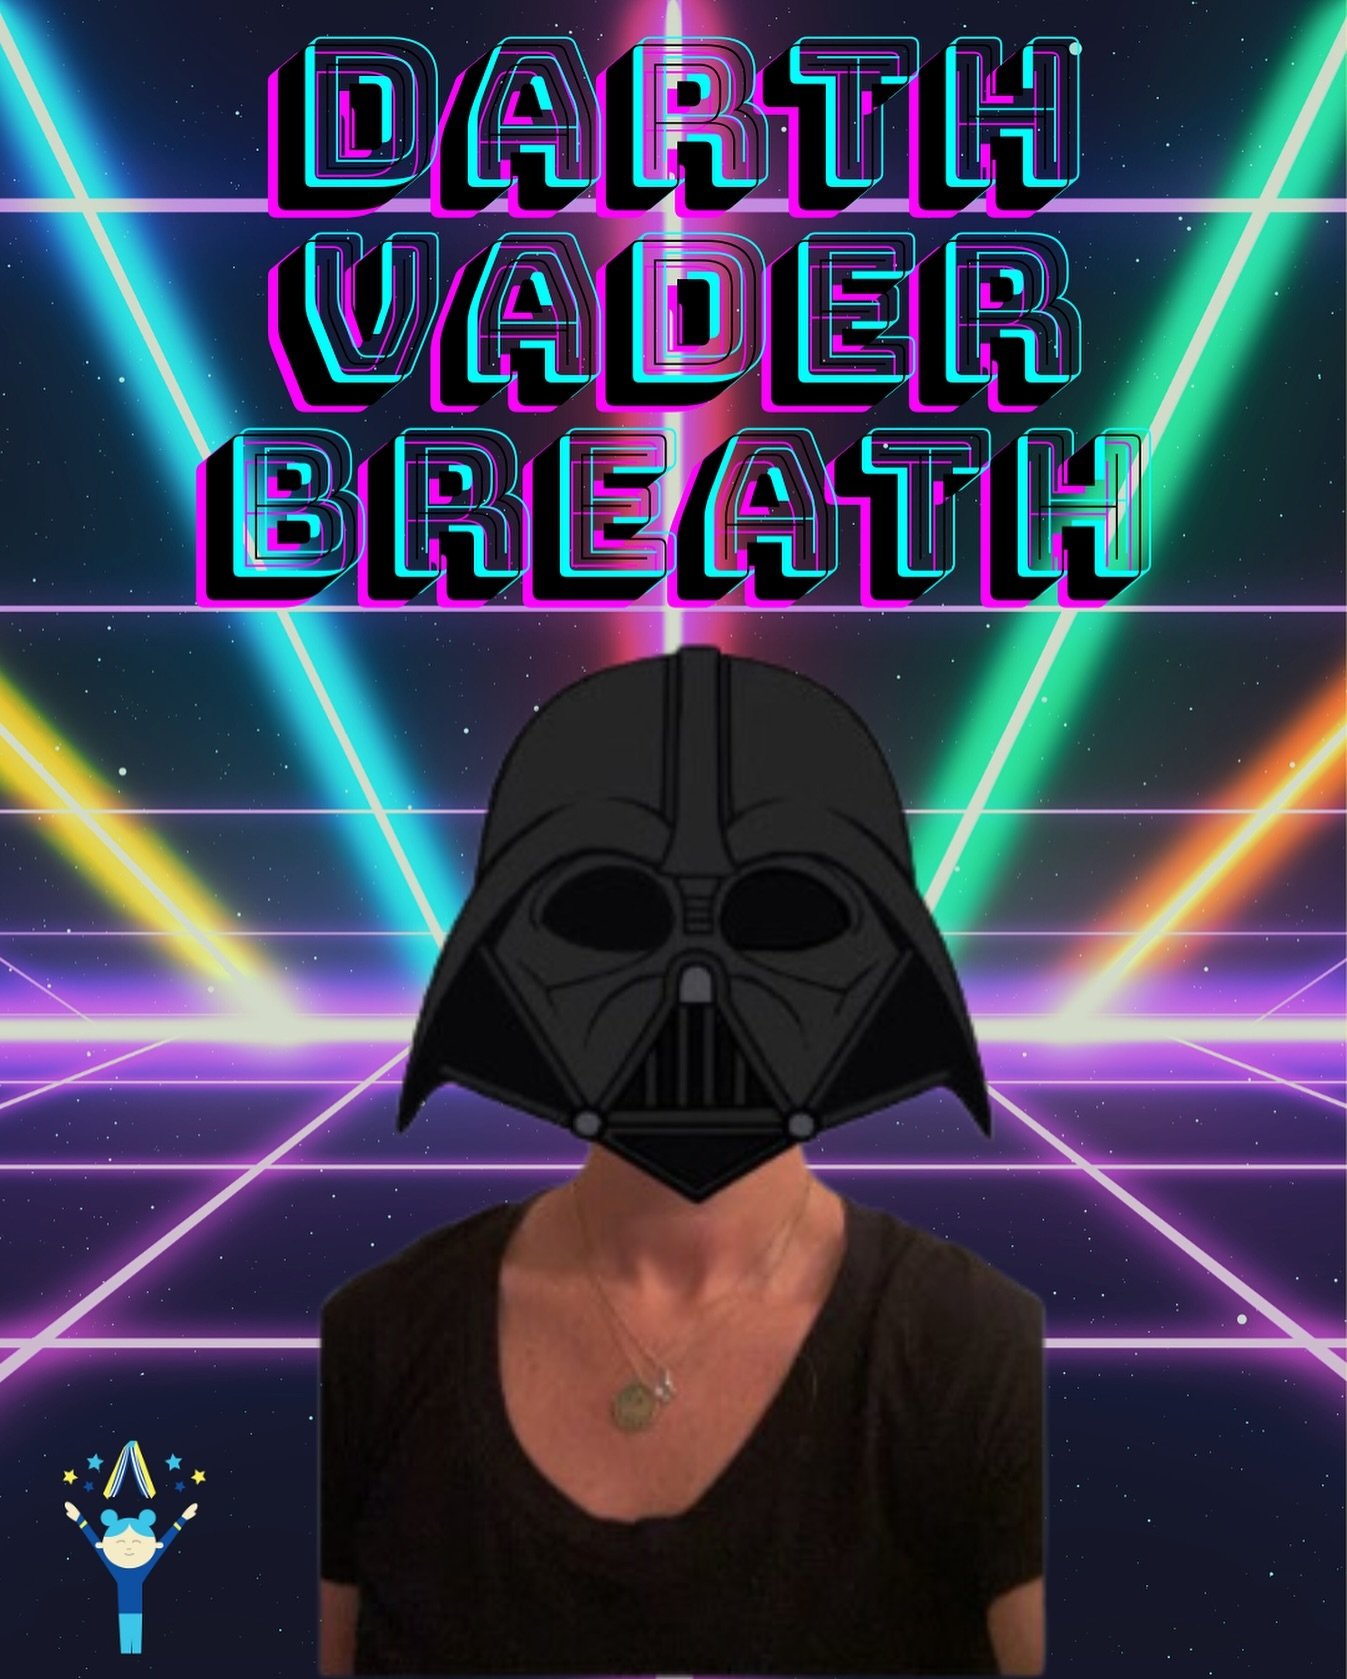 ⚡️🛰 Celebrate May 4th, Star Wars Day, with Darth Vader Breath (aka Ujjayi Breath) 😤. May the Fourth/Force Be With You, Little Yogis, now go see a Star War!

Screenshot 📲 and click the link to watch 👉: https://bit.ly/3QAywRF

#mindfulnessforkids #